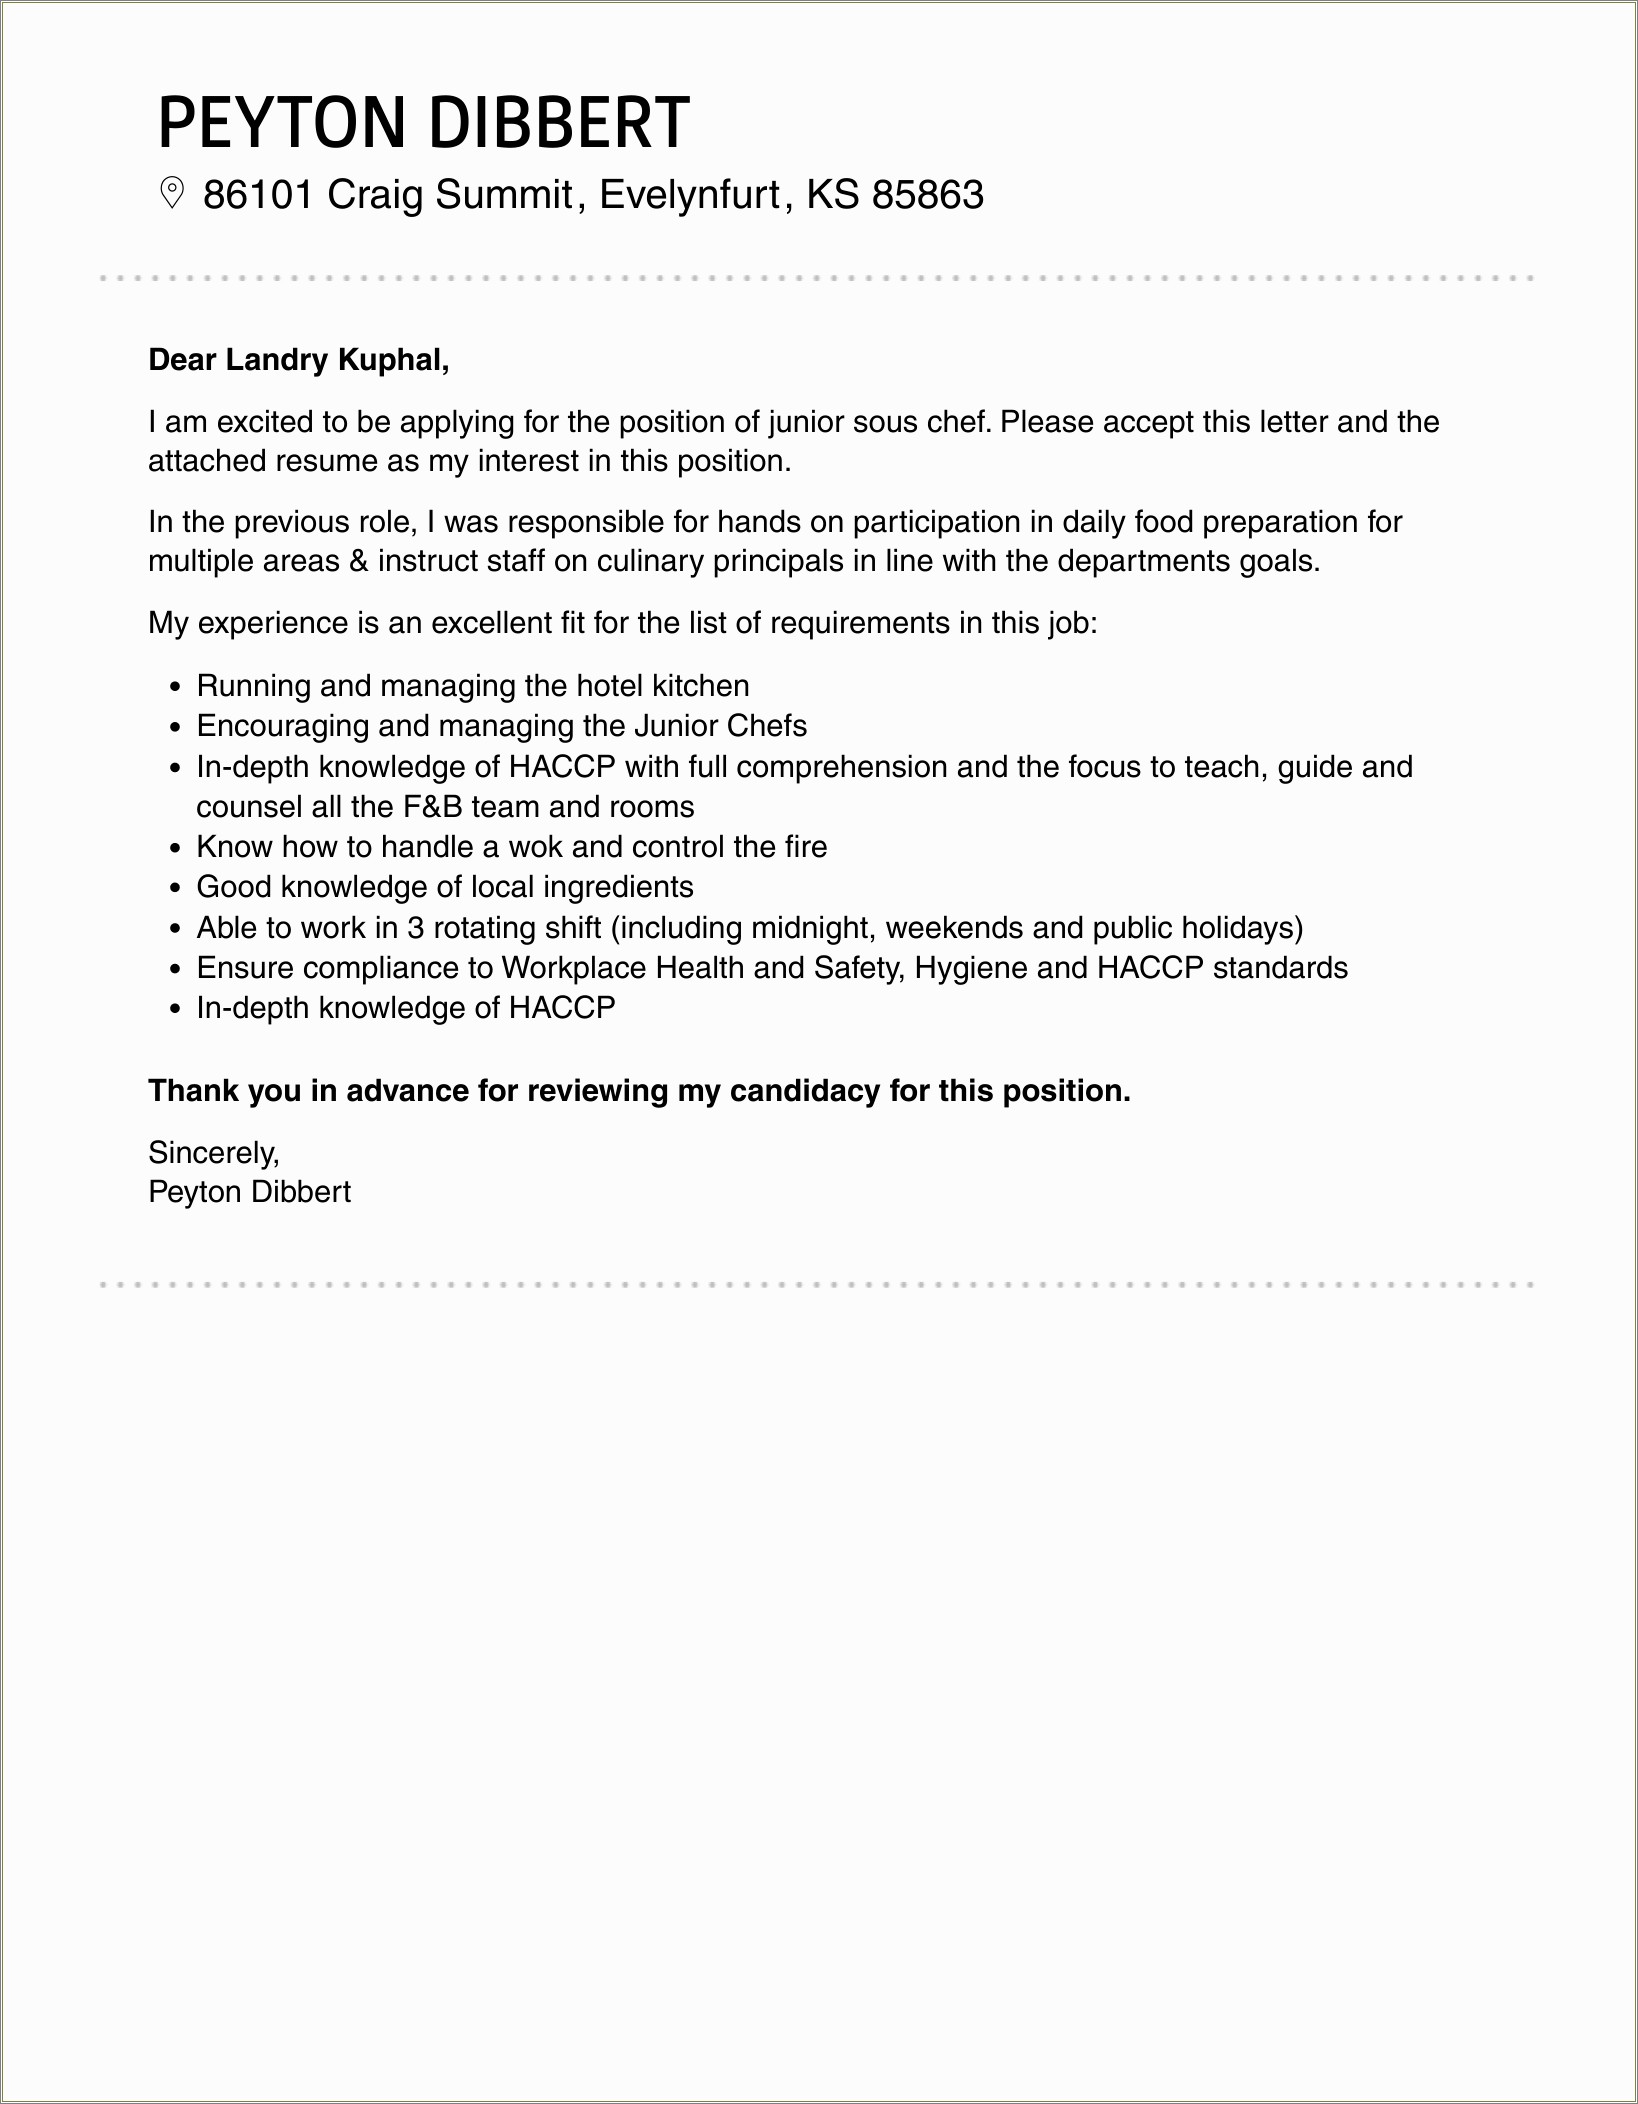 Resume Cover Letter For A Sous Chef